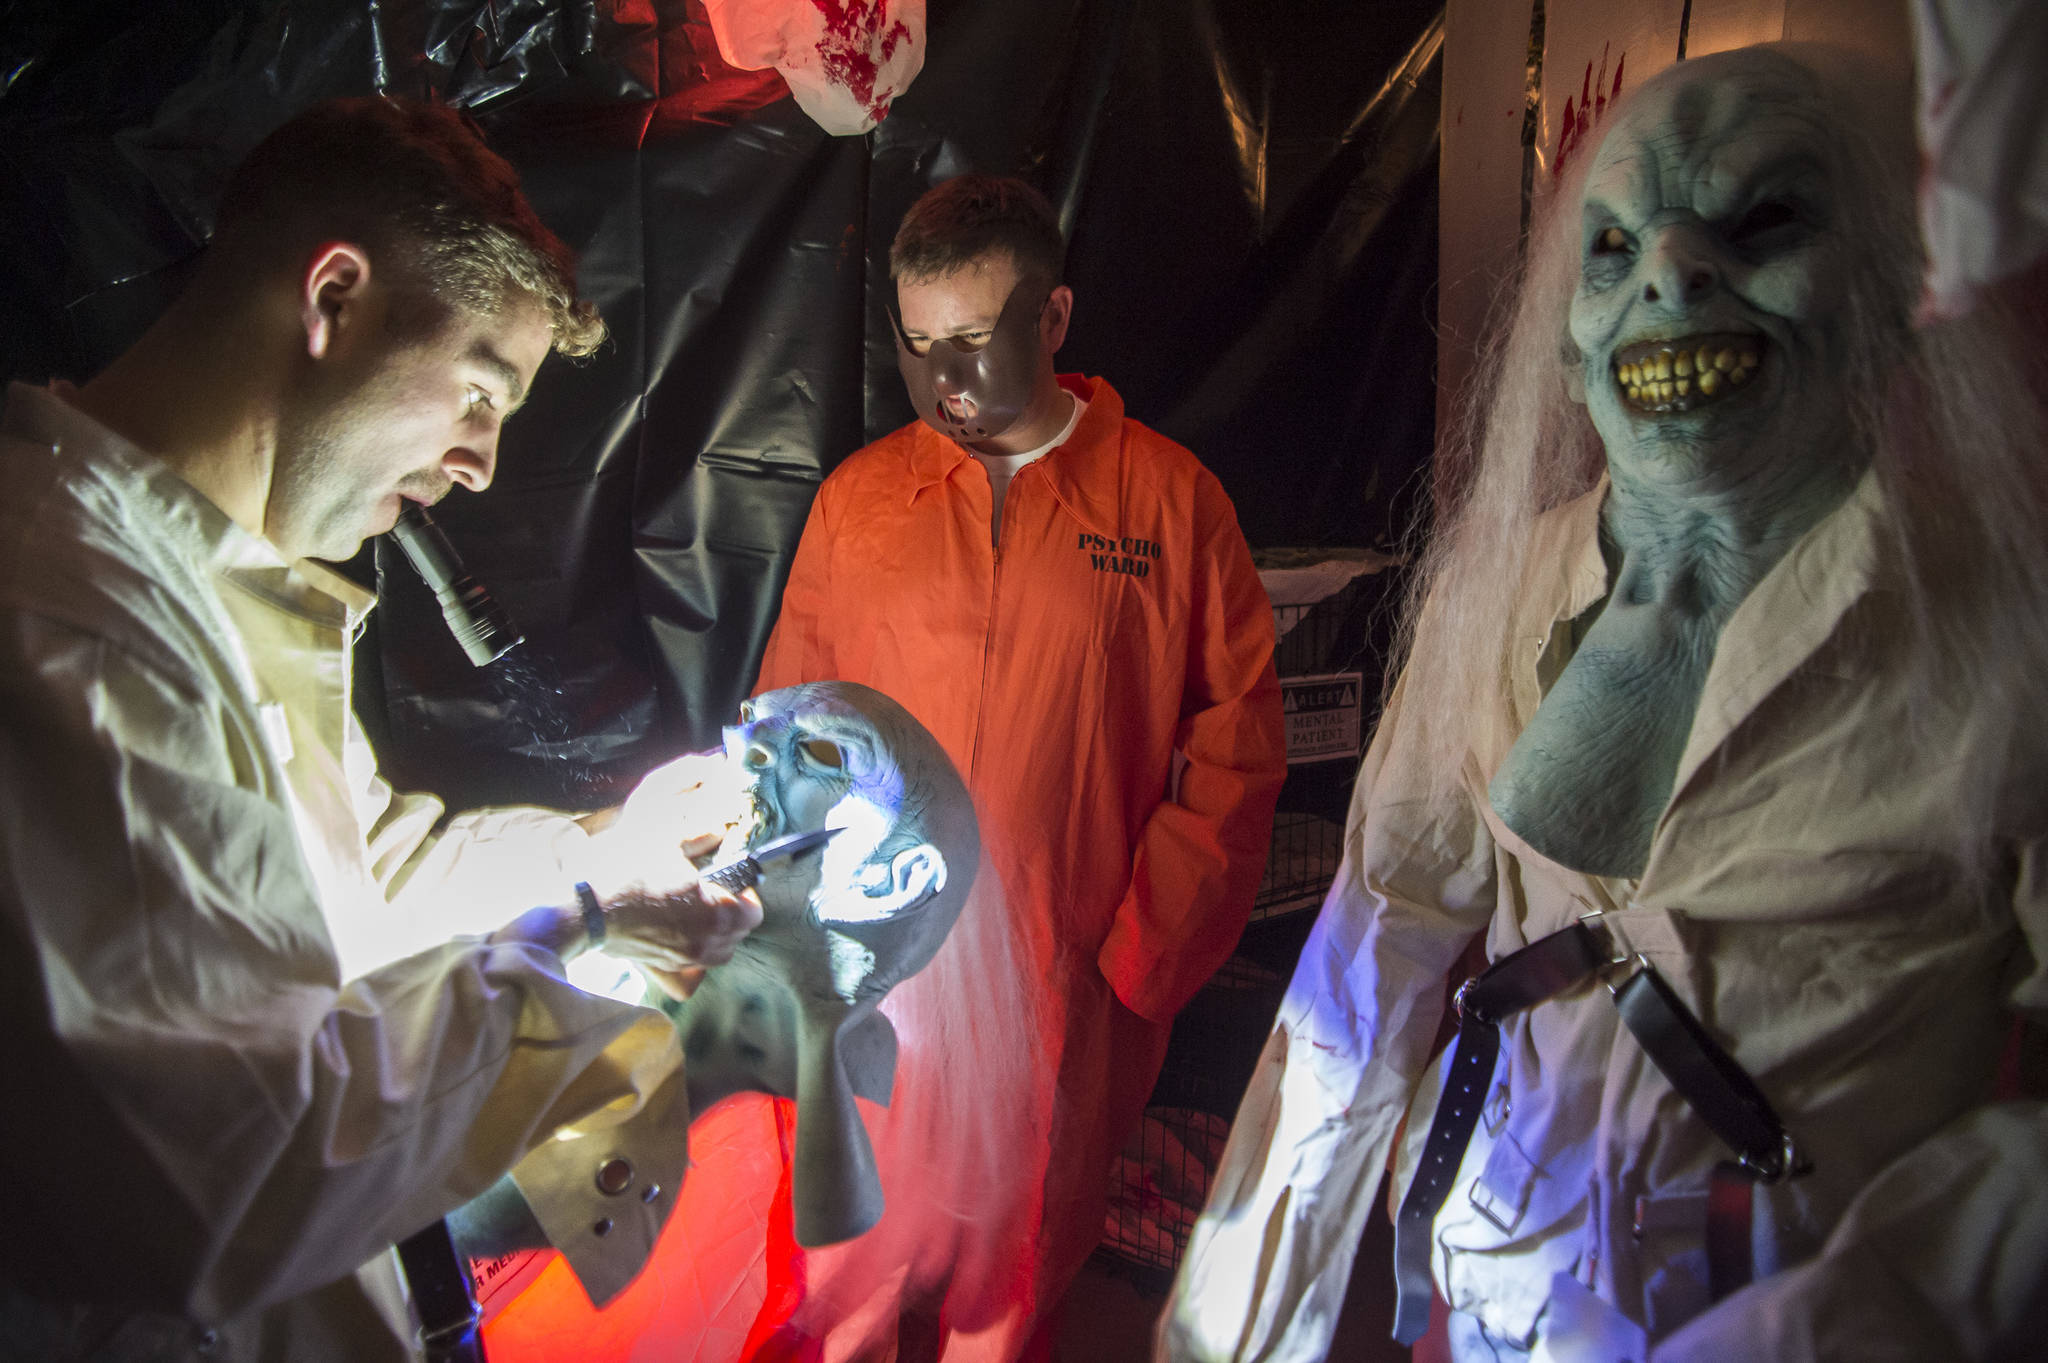 Anthony Hotka customizes his mask at the Haunted Station at the U.S. Coast Guard’s Station Juneau on Friday, Oct. 26, 2018. Station personnel pay for all the decoration themselves and take three weeks to ready the station. Entry is non perishable food items for the Southeast Alaska Food Bank. (Michael Penn | Juneau Empire)